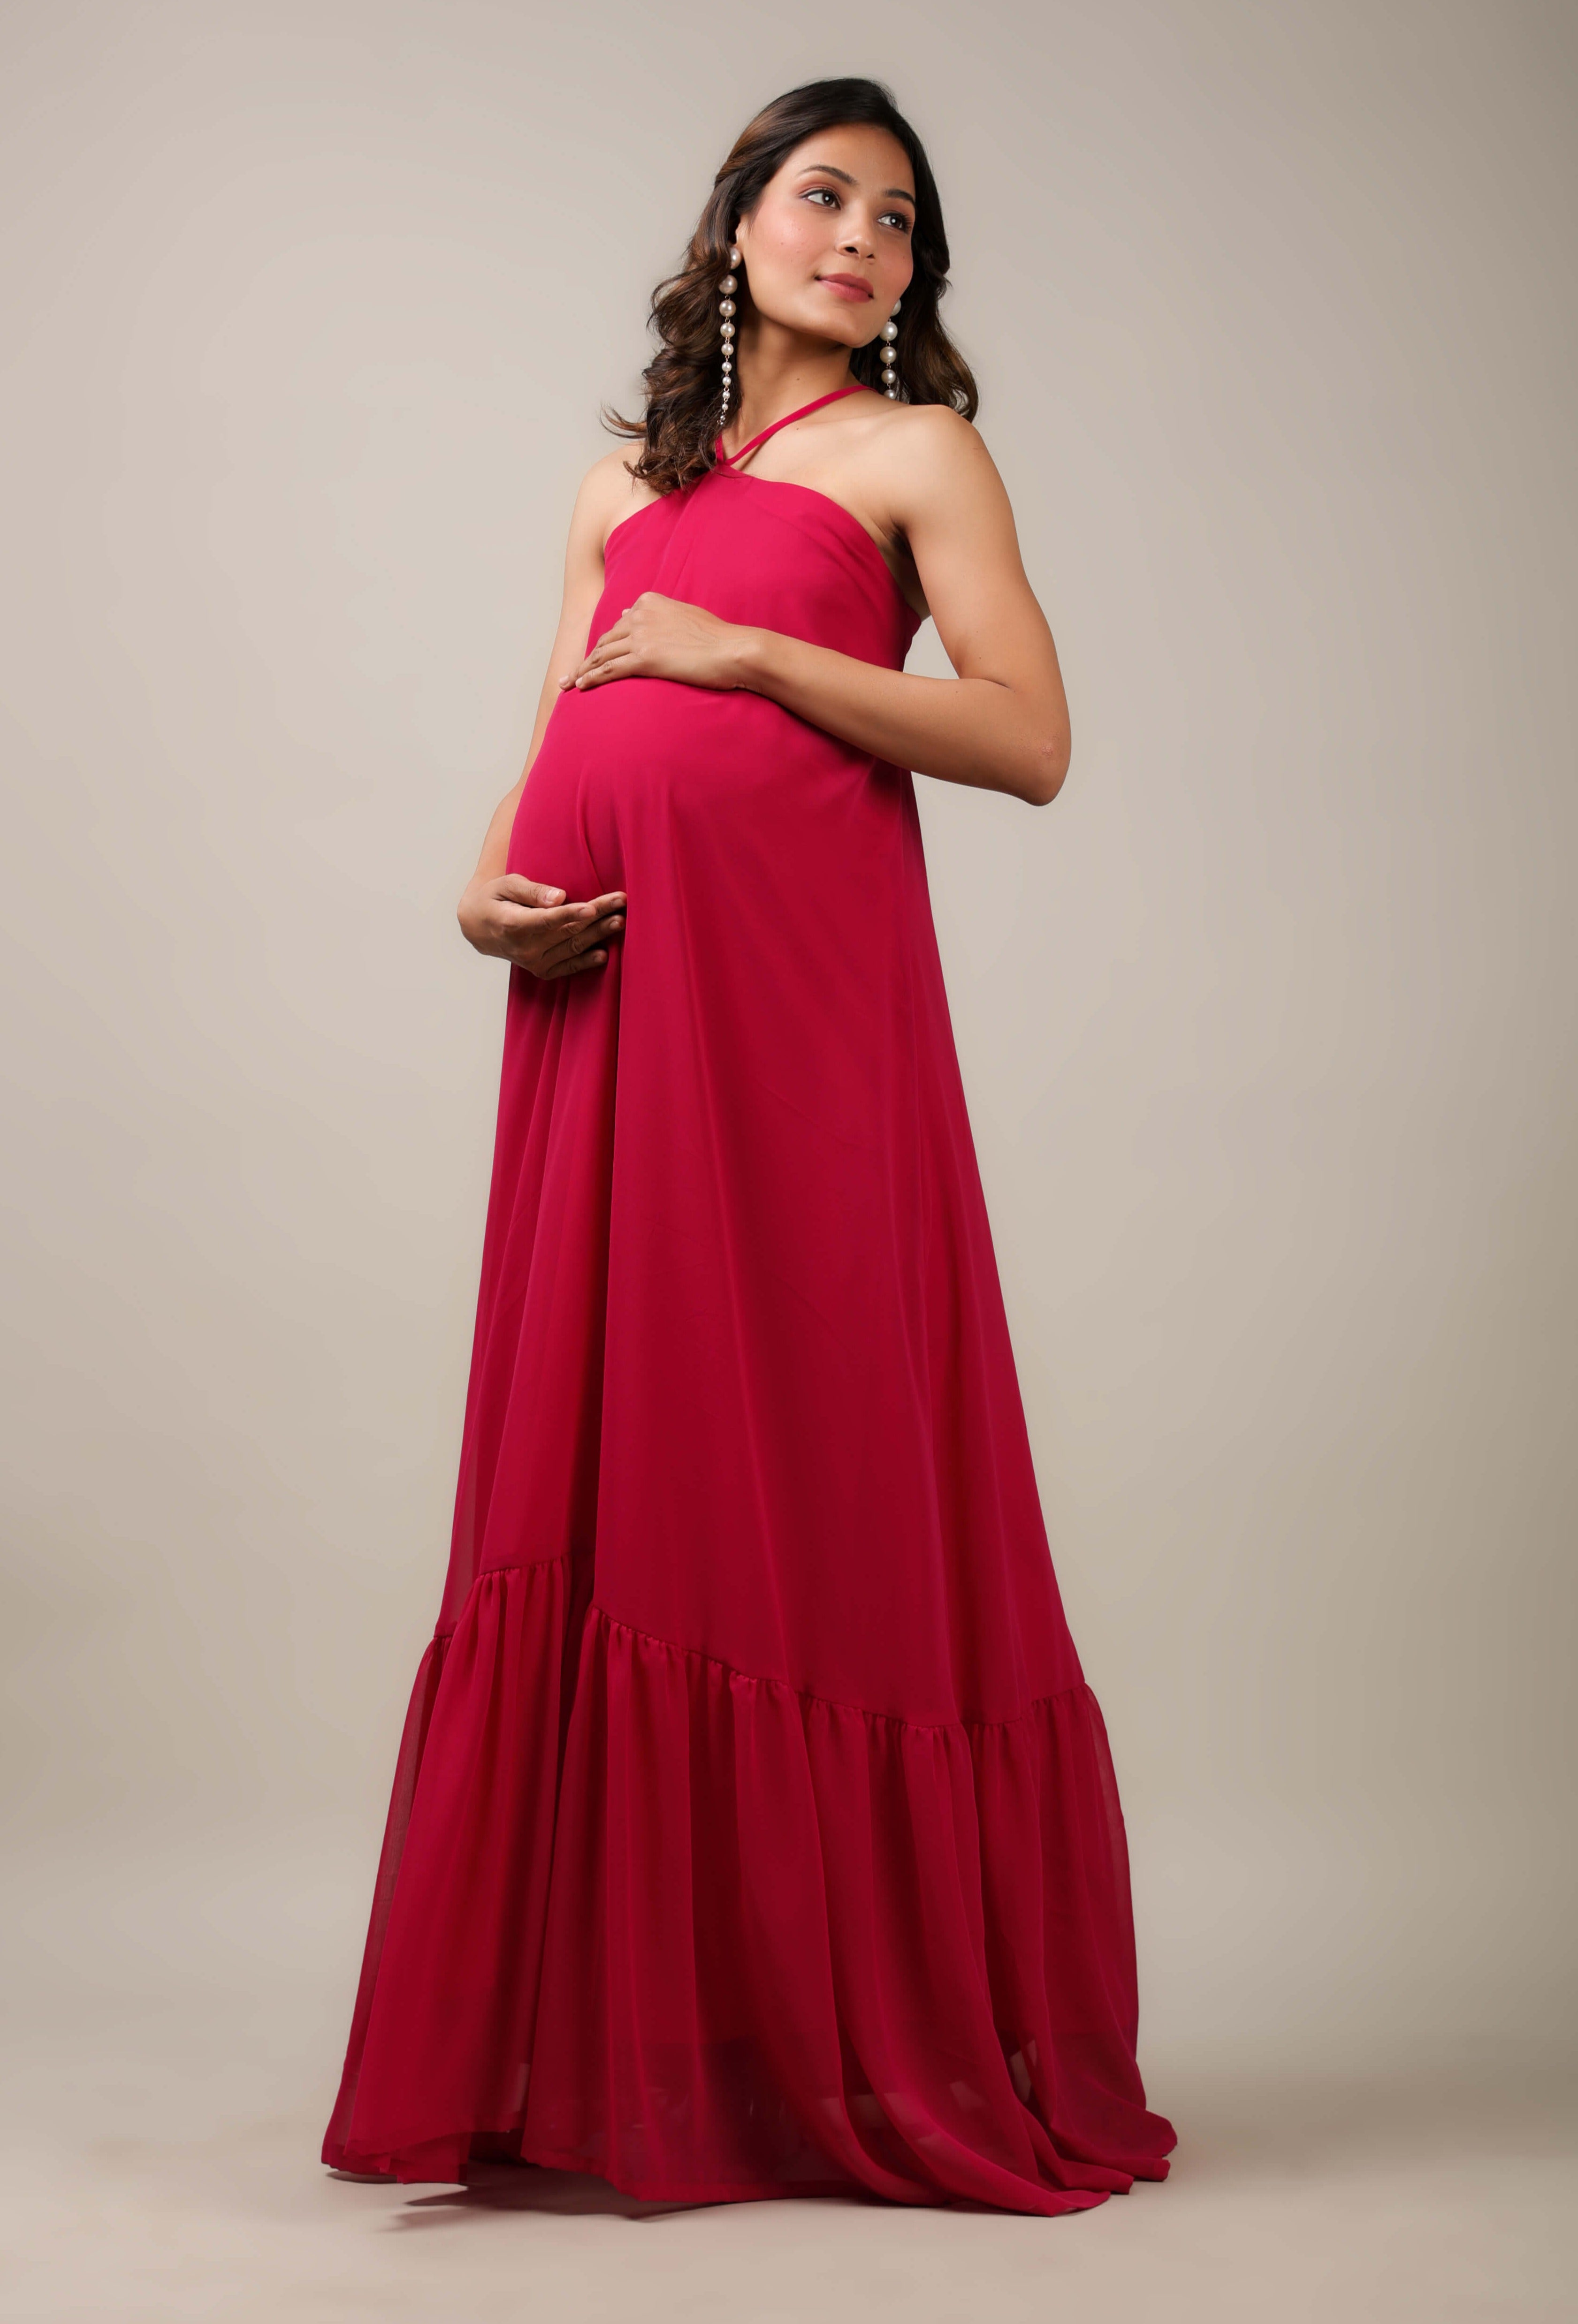 Red Maternity Dress For Photoshoot